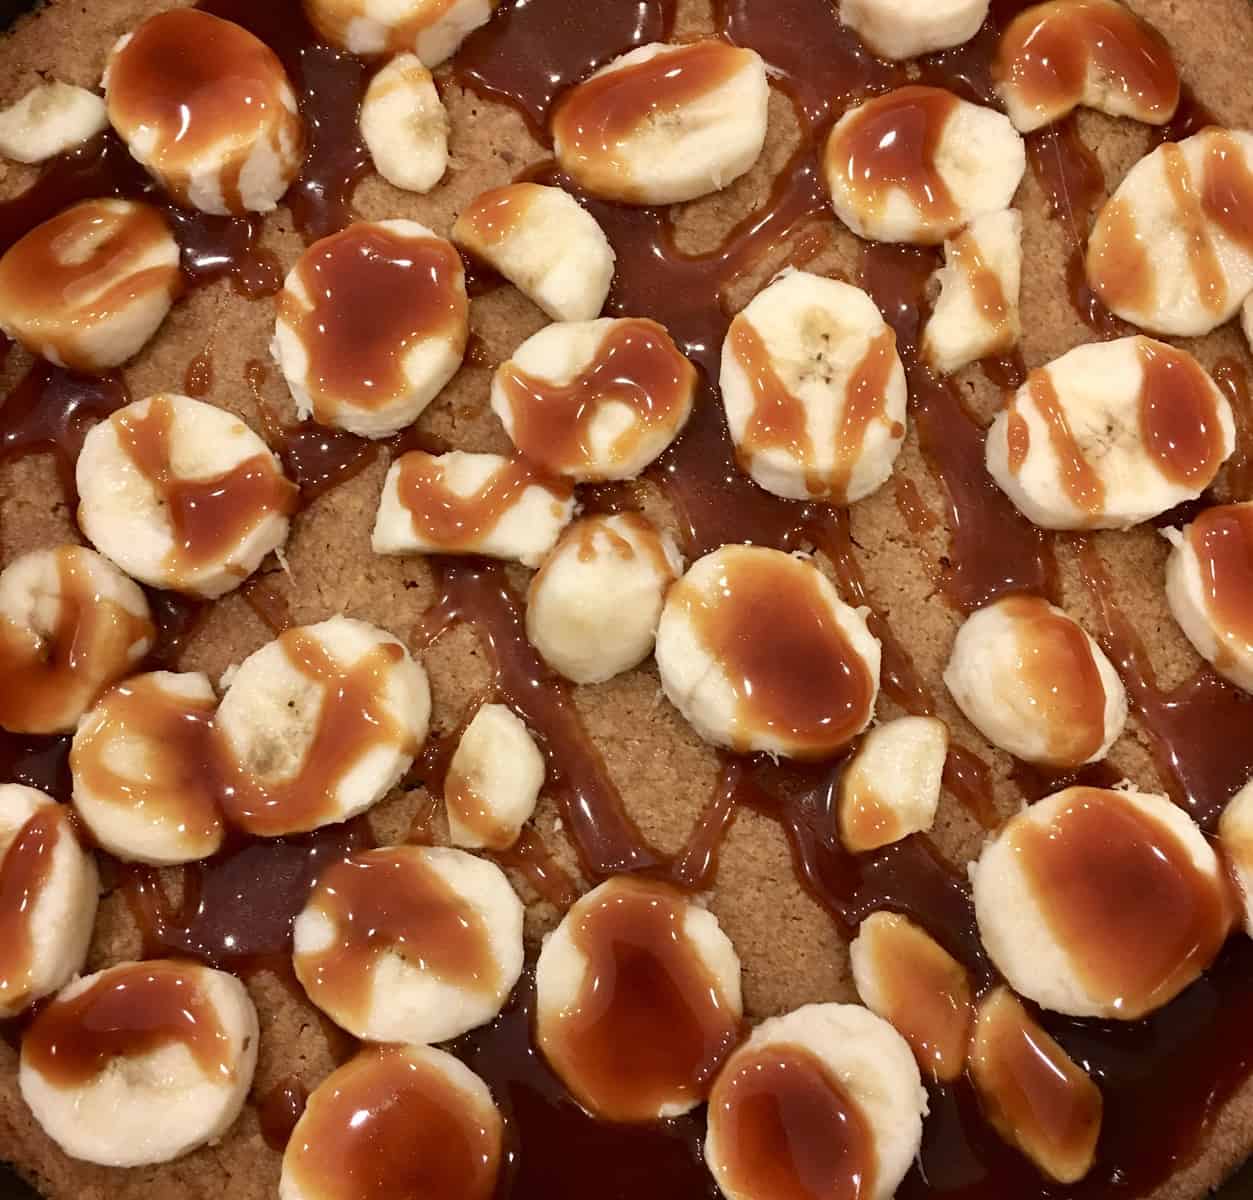 Dulce de leche drizzled on top of the bananas. 